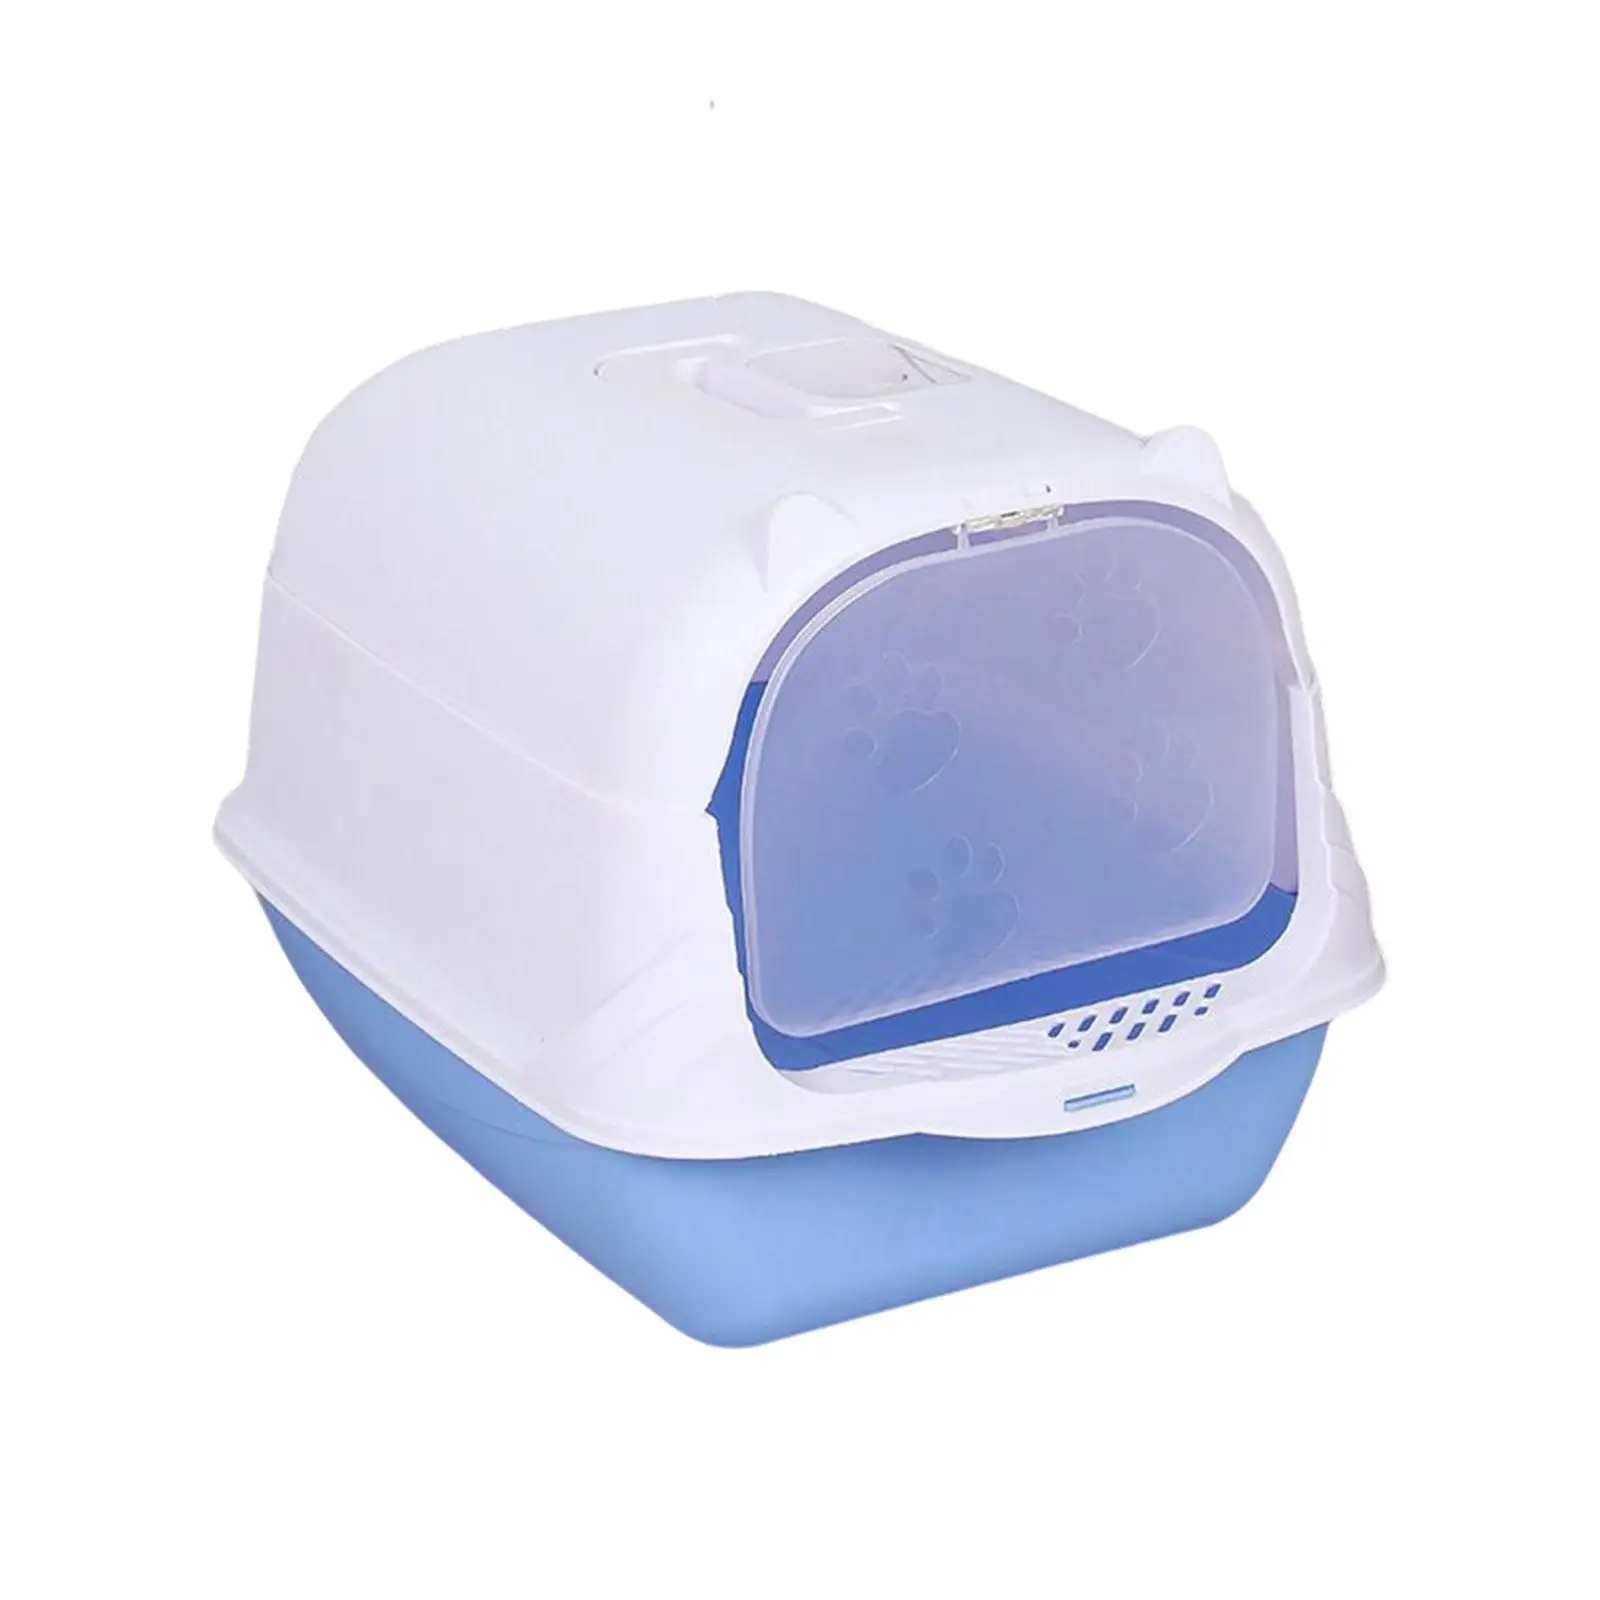 High-sided Hooded Litter Box, Closed Potty, Commode Litter Box, Bedpan, Deep